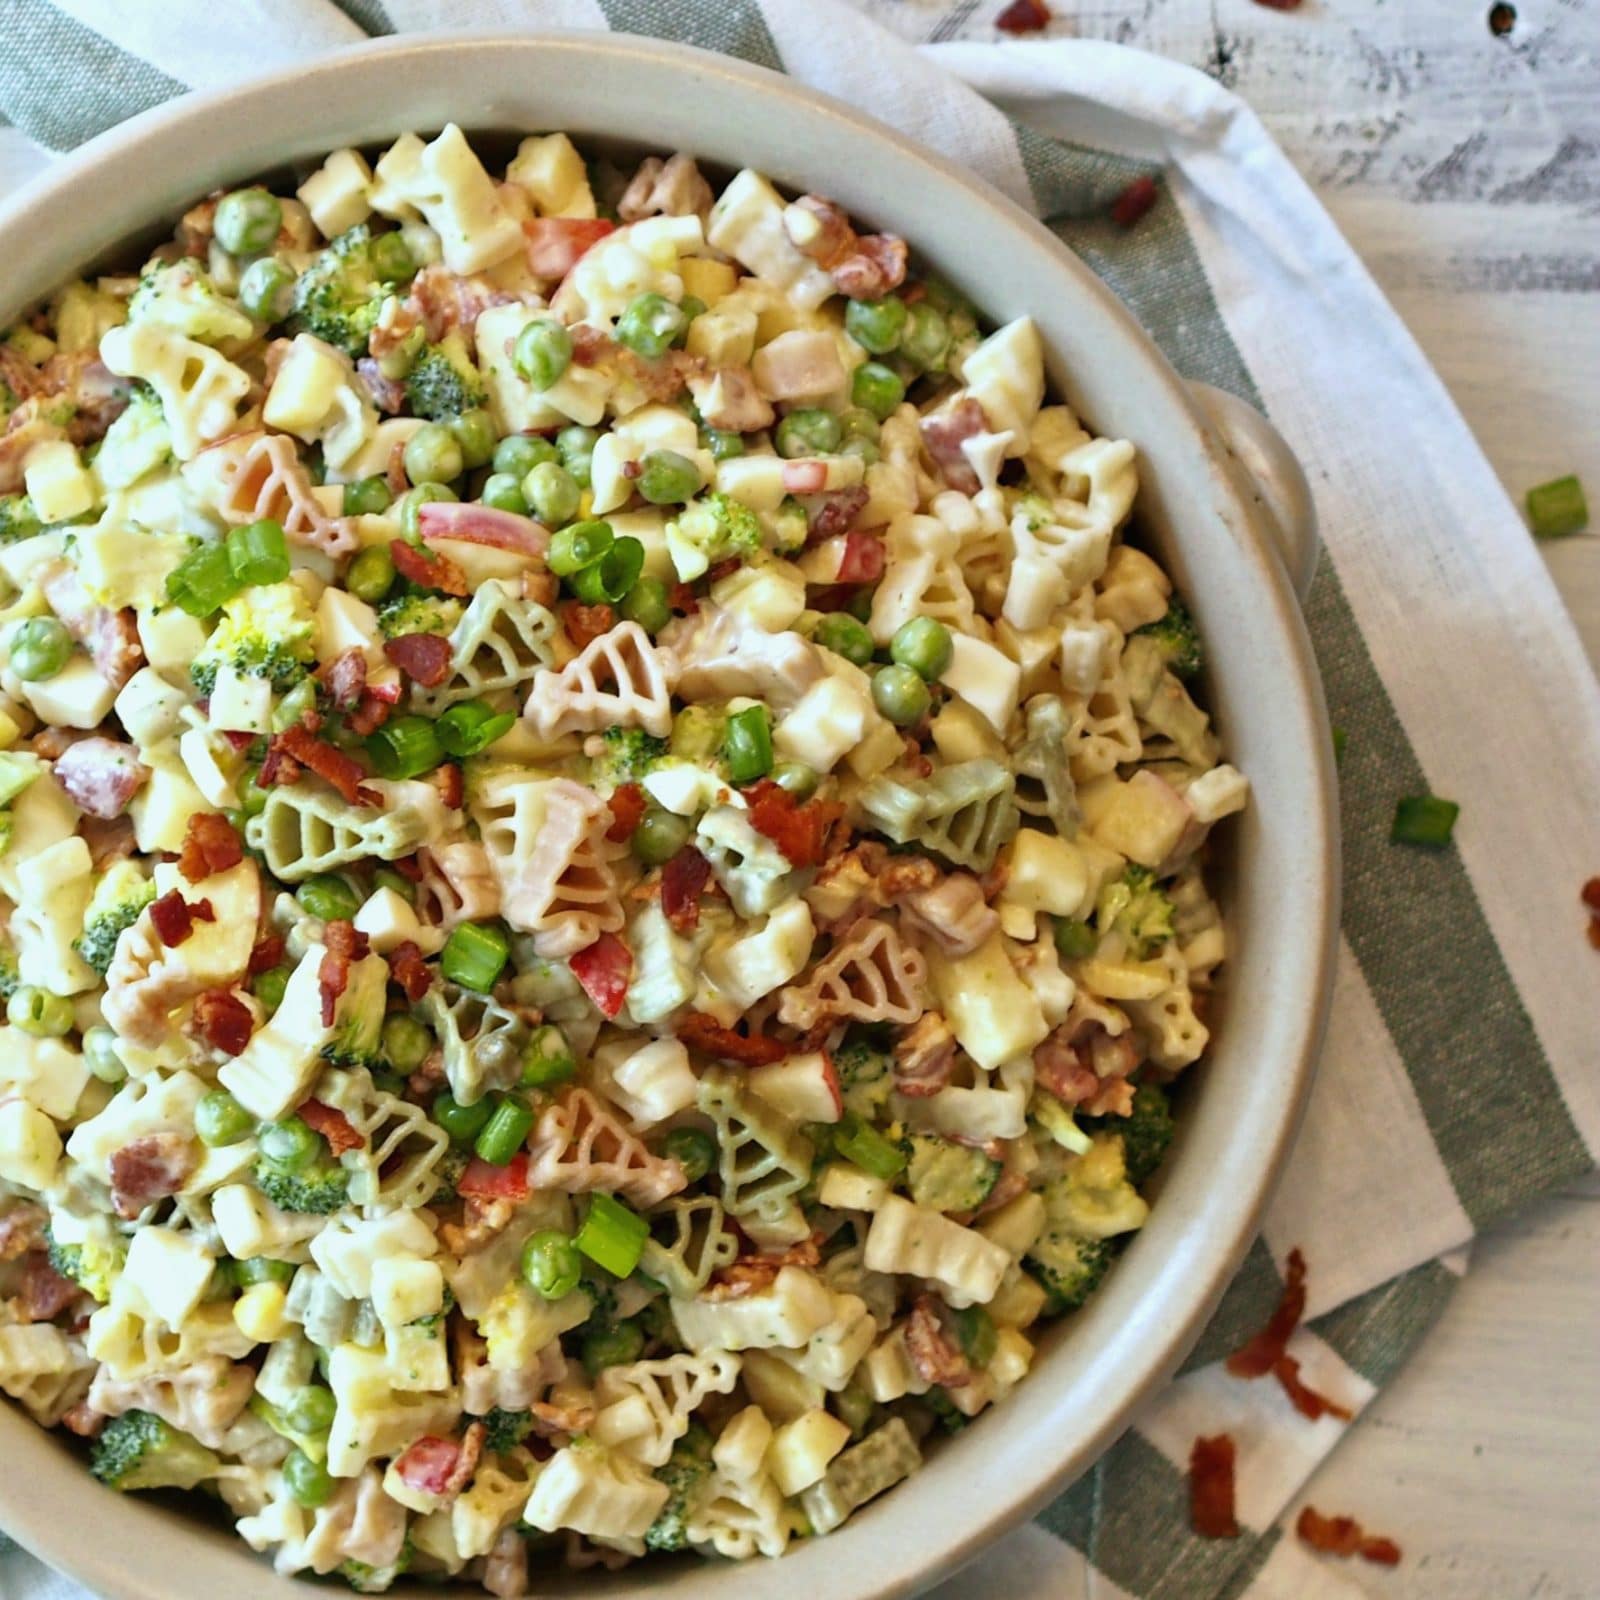 Broccoli Apple & Bacon Pasta Salad has something for everyone. Crunchy broccoli, sweet apple, salty bacon, perfect pasta and a sweet, tangy dressing. Simply Sated